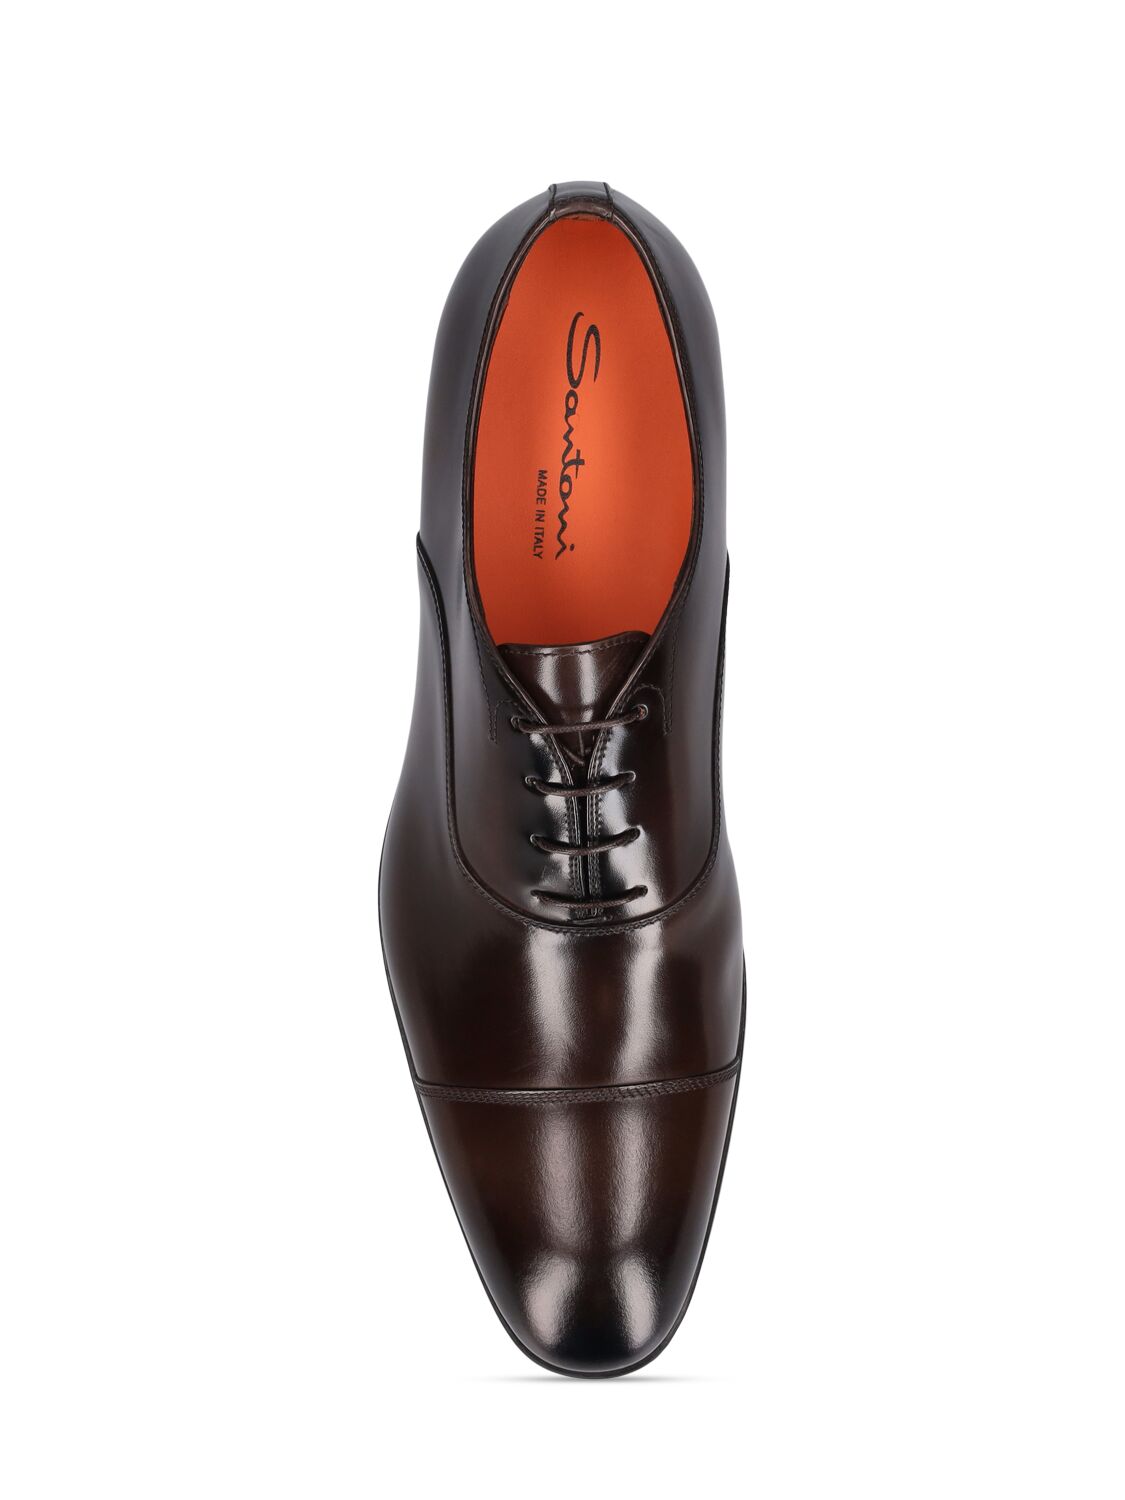 Shop Santoni Backyard Leather Lace-up Shoes In Dark Brown